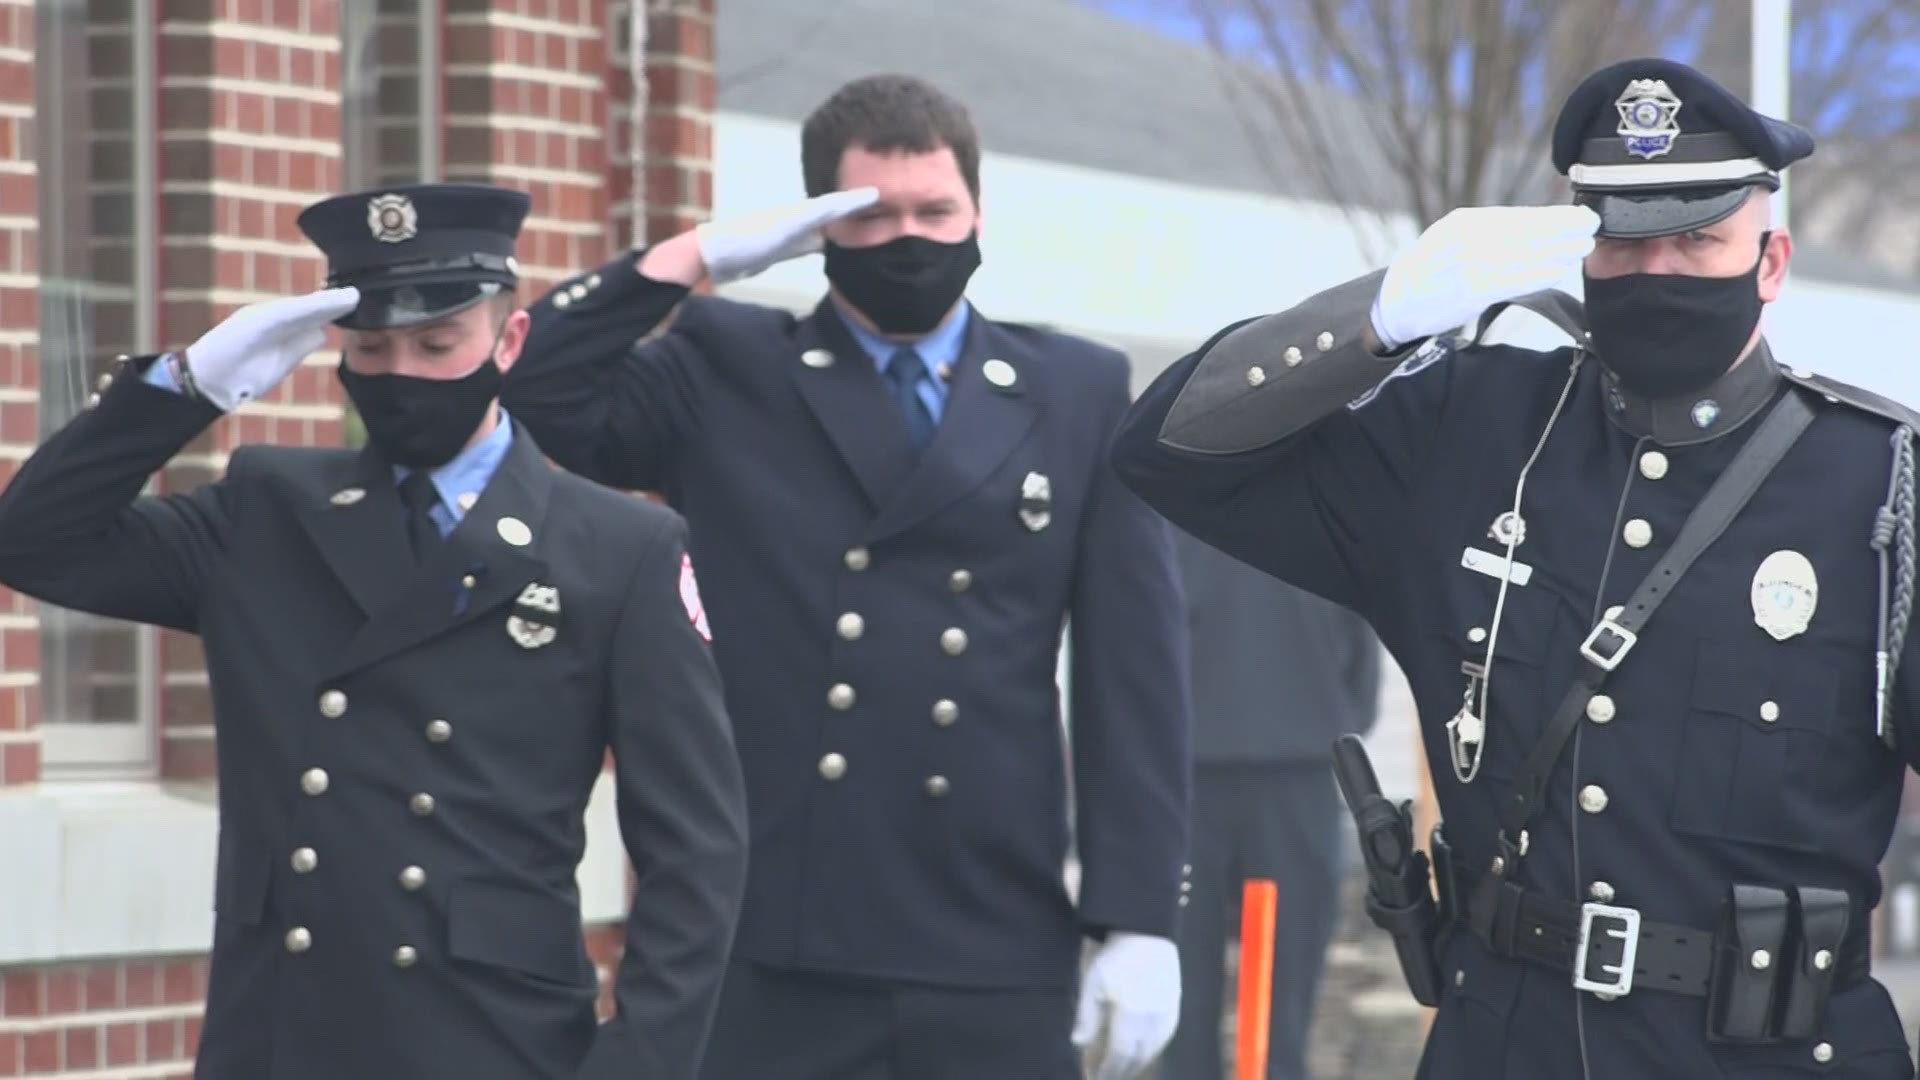 March 1st, 2021 is the second anniversary of Berwick fire Capt. Joel Barnes' death. A ceremony honoring him was held on Monday at the Berwick Fire Station.